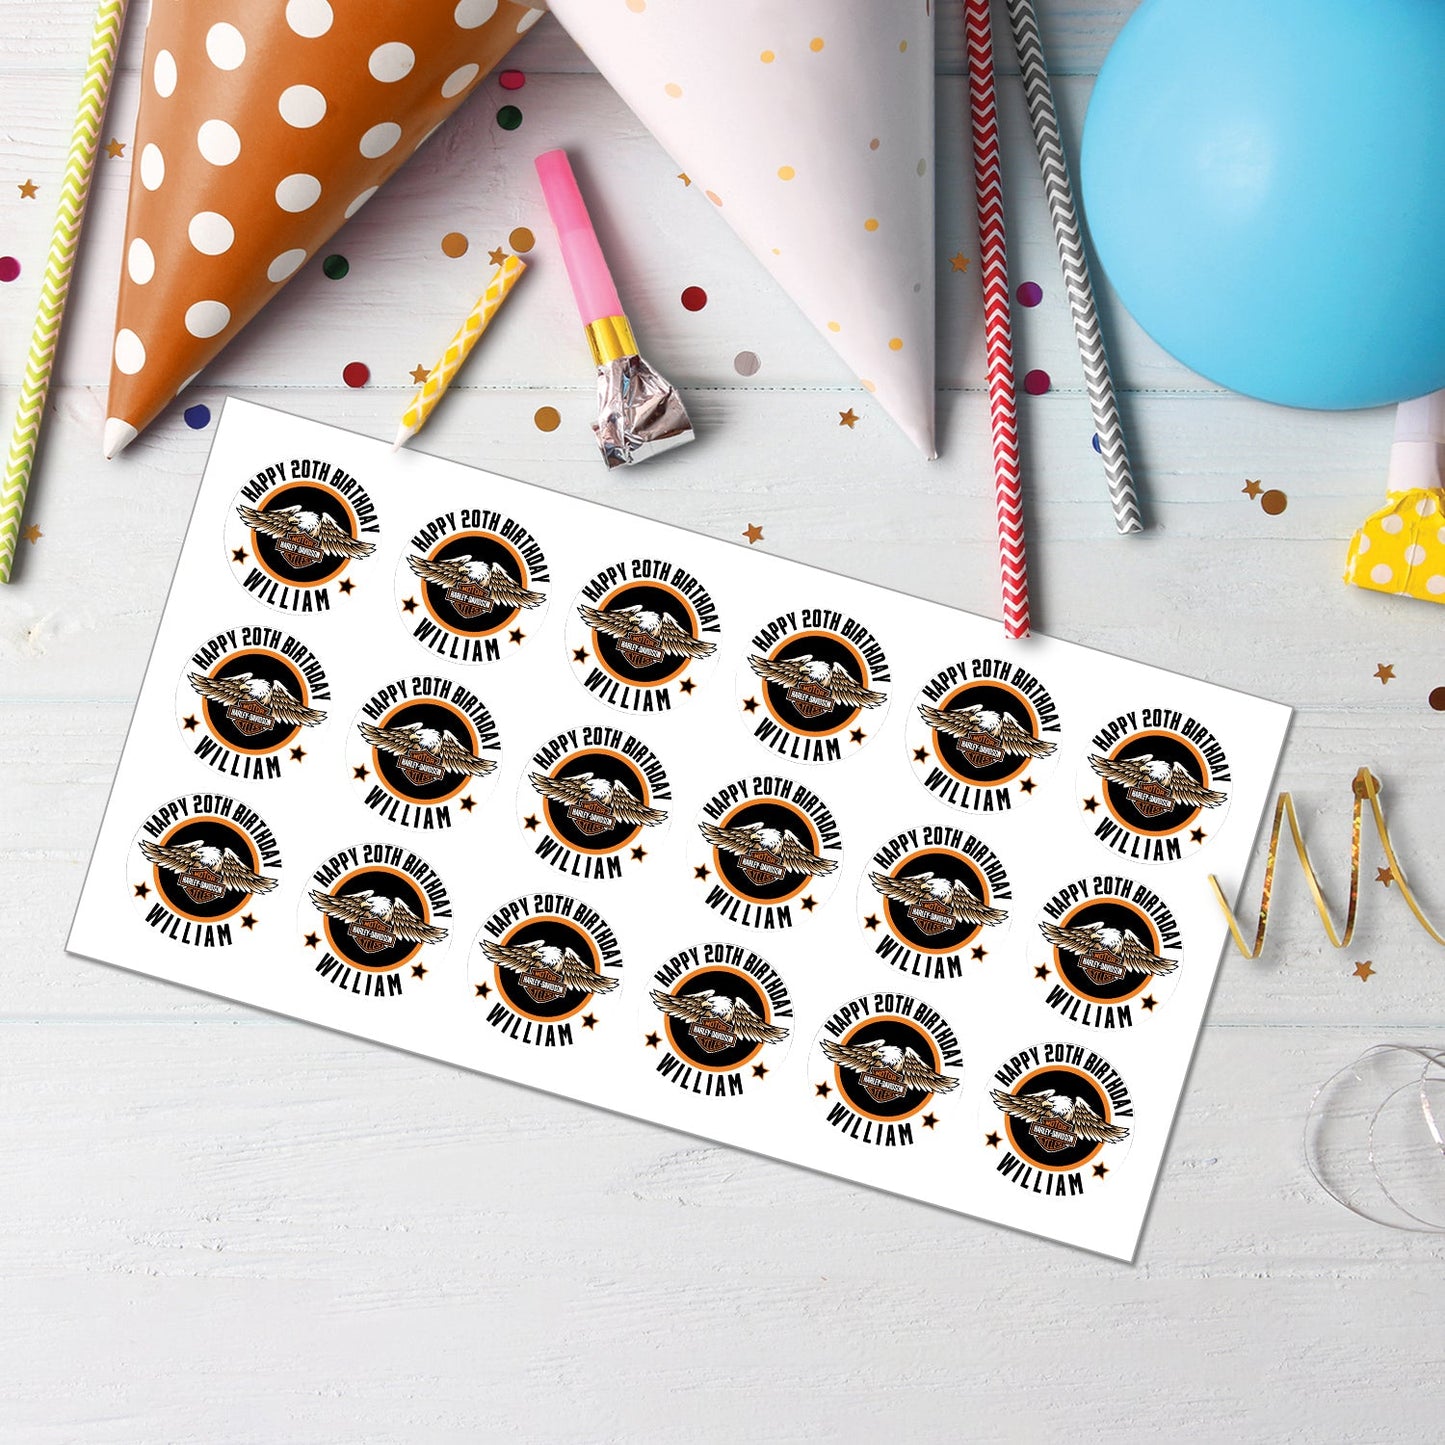 Harley Davidson Cupcake Toppers - Personalized Touch for Your Sweet Treats